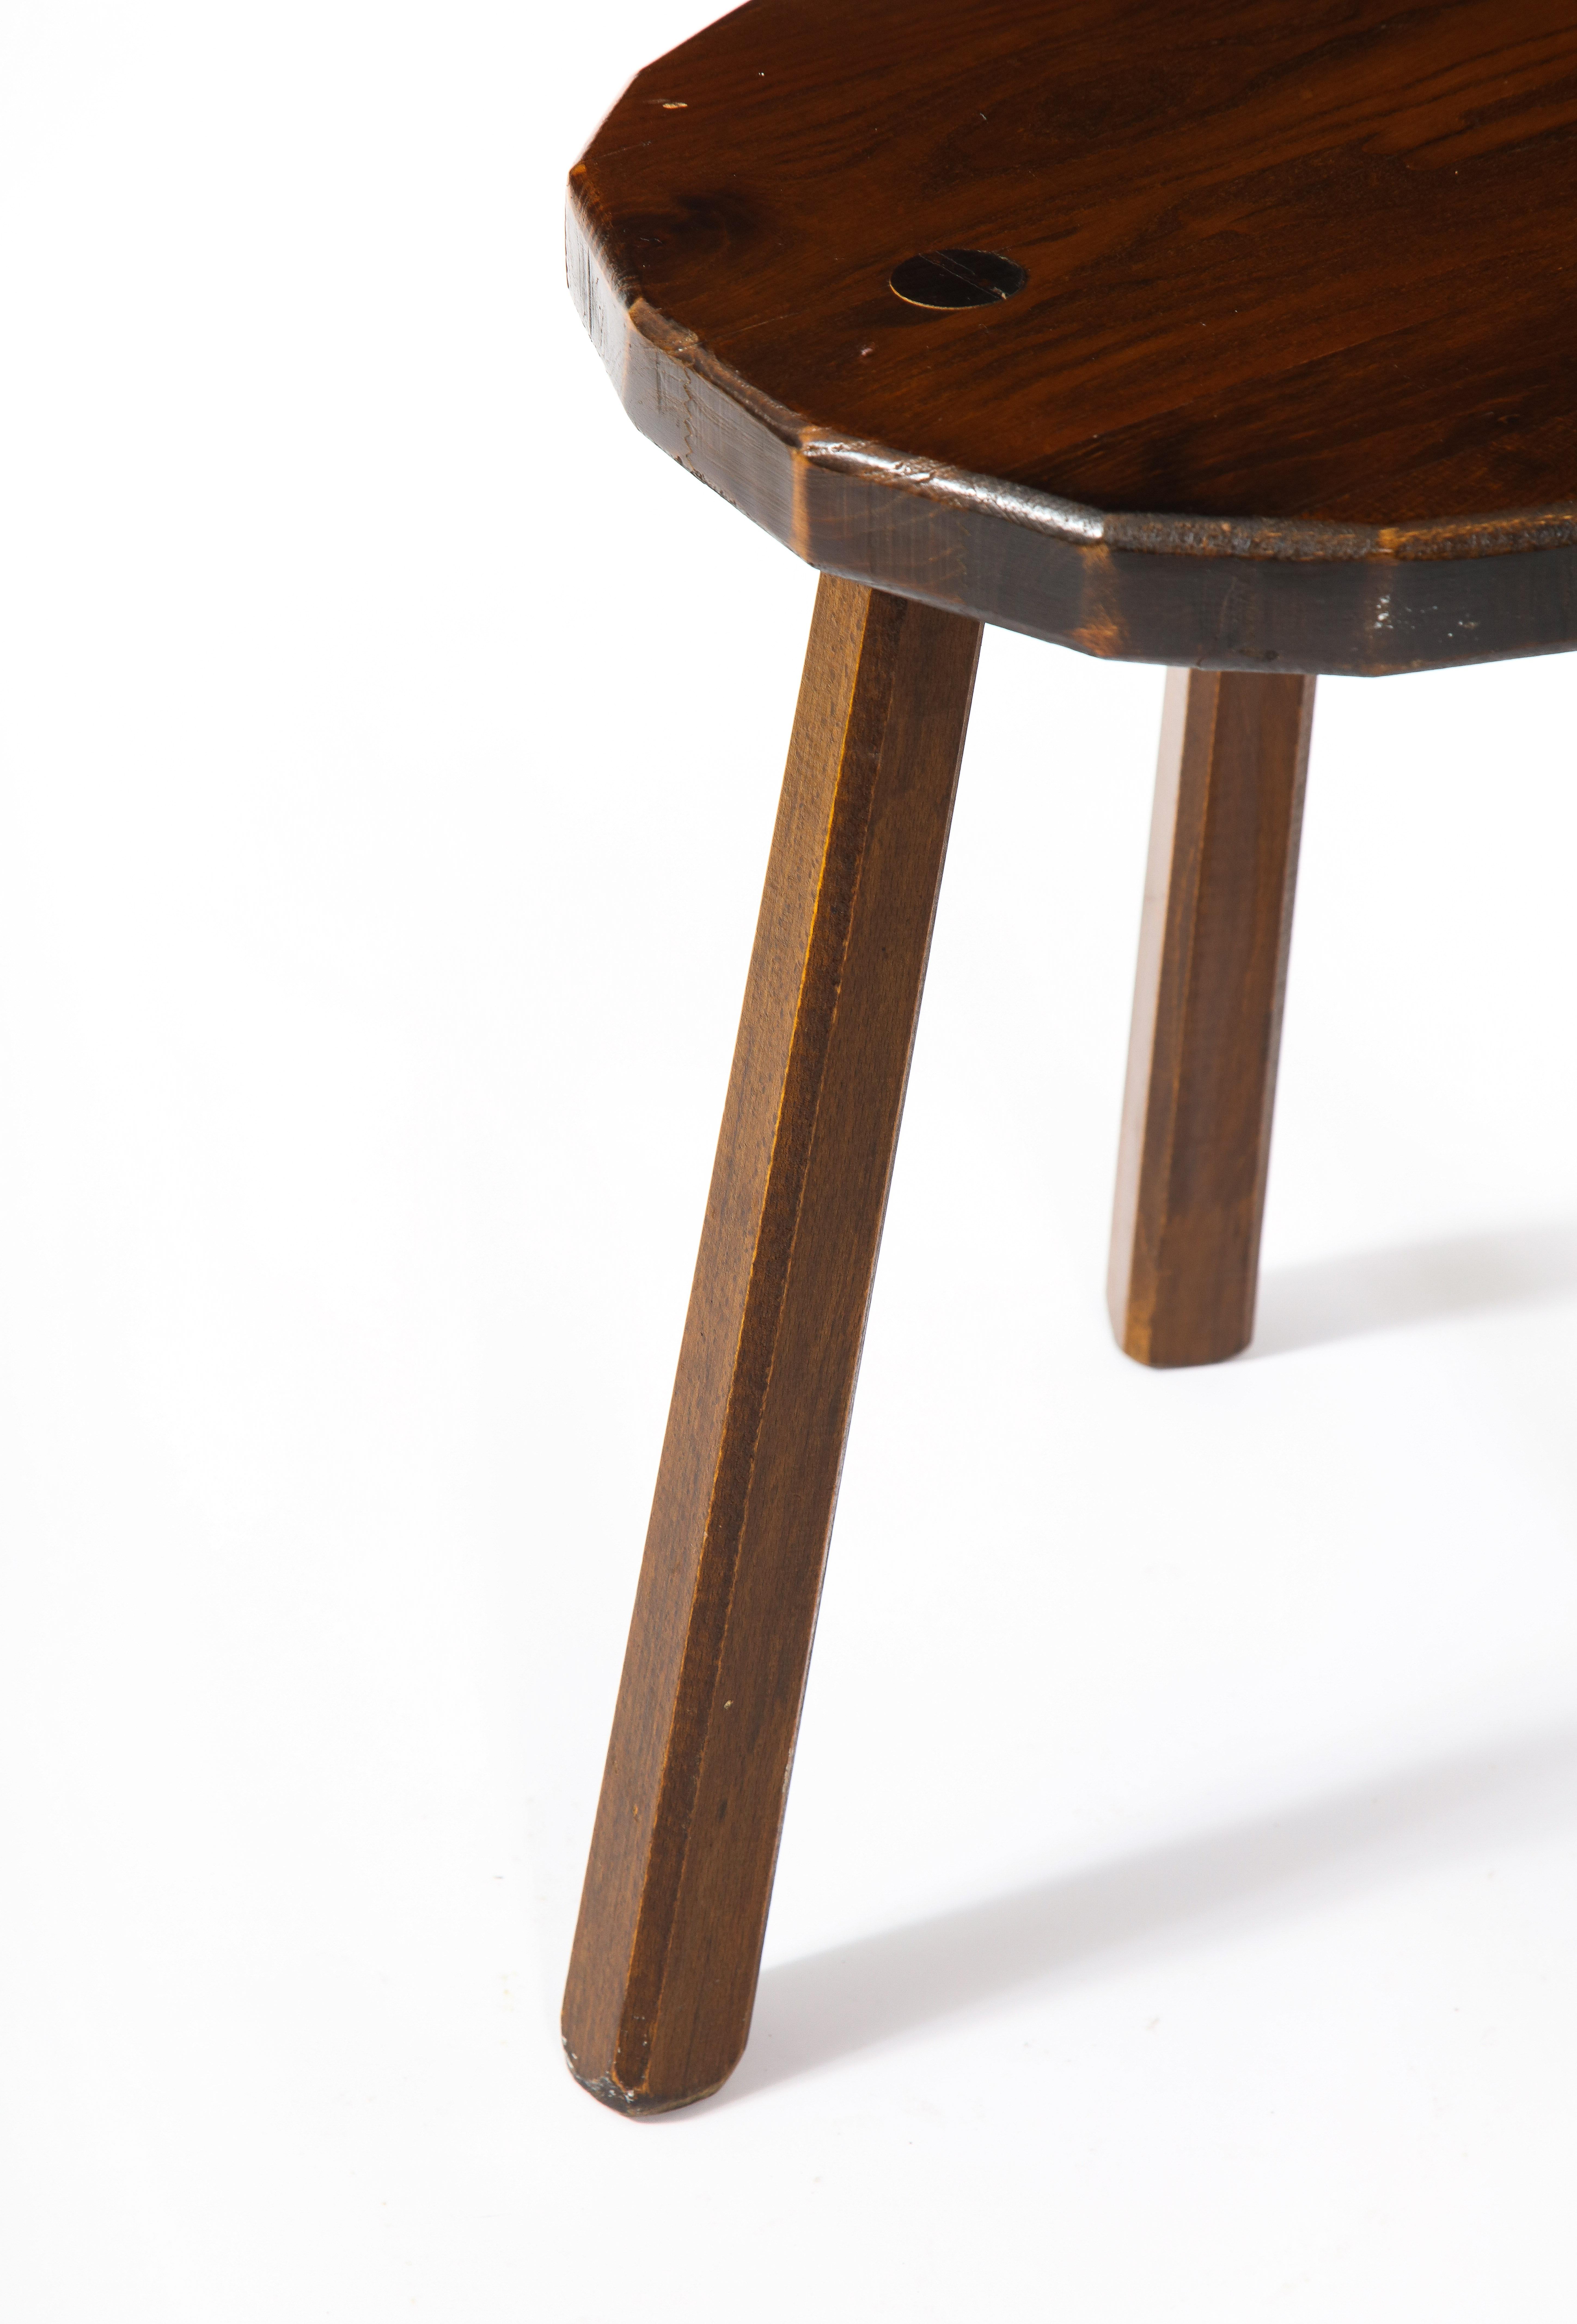 20th Century Splayed Leg Tripodal Faceted Dark Elm Stools, France 1960's For Sale